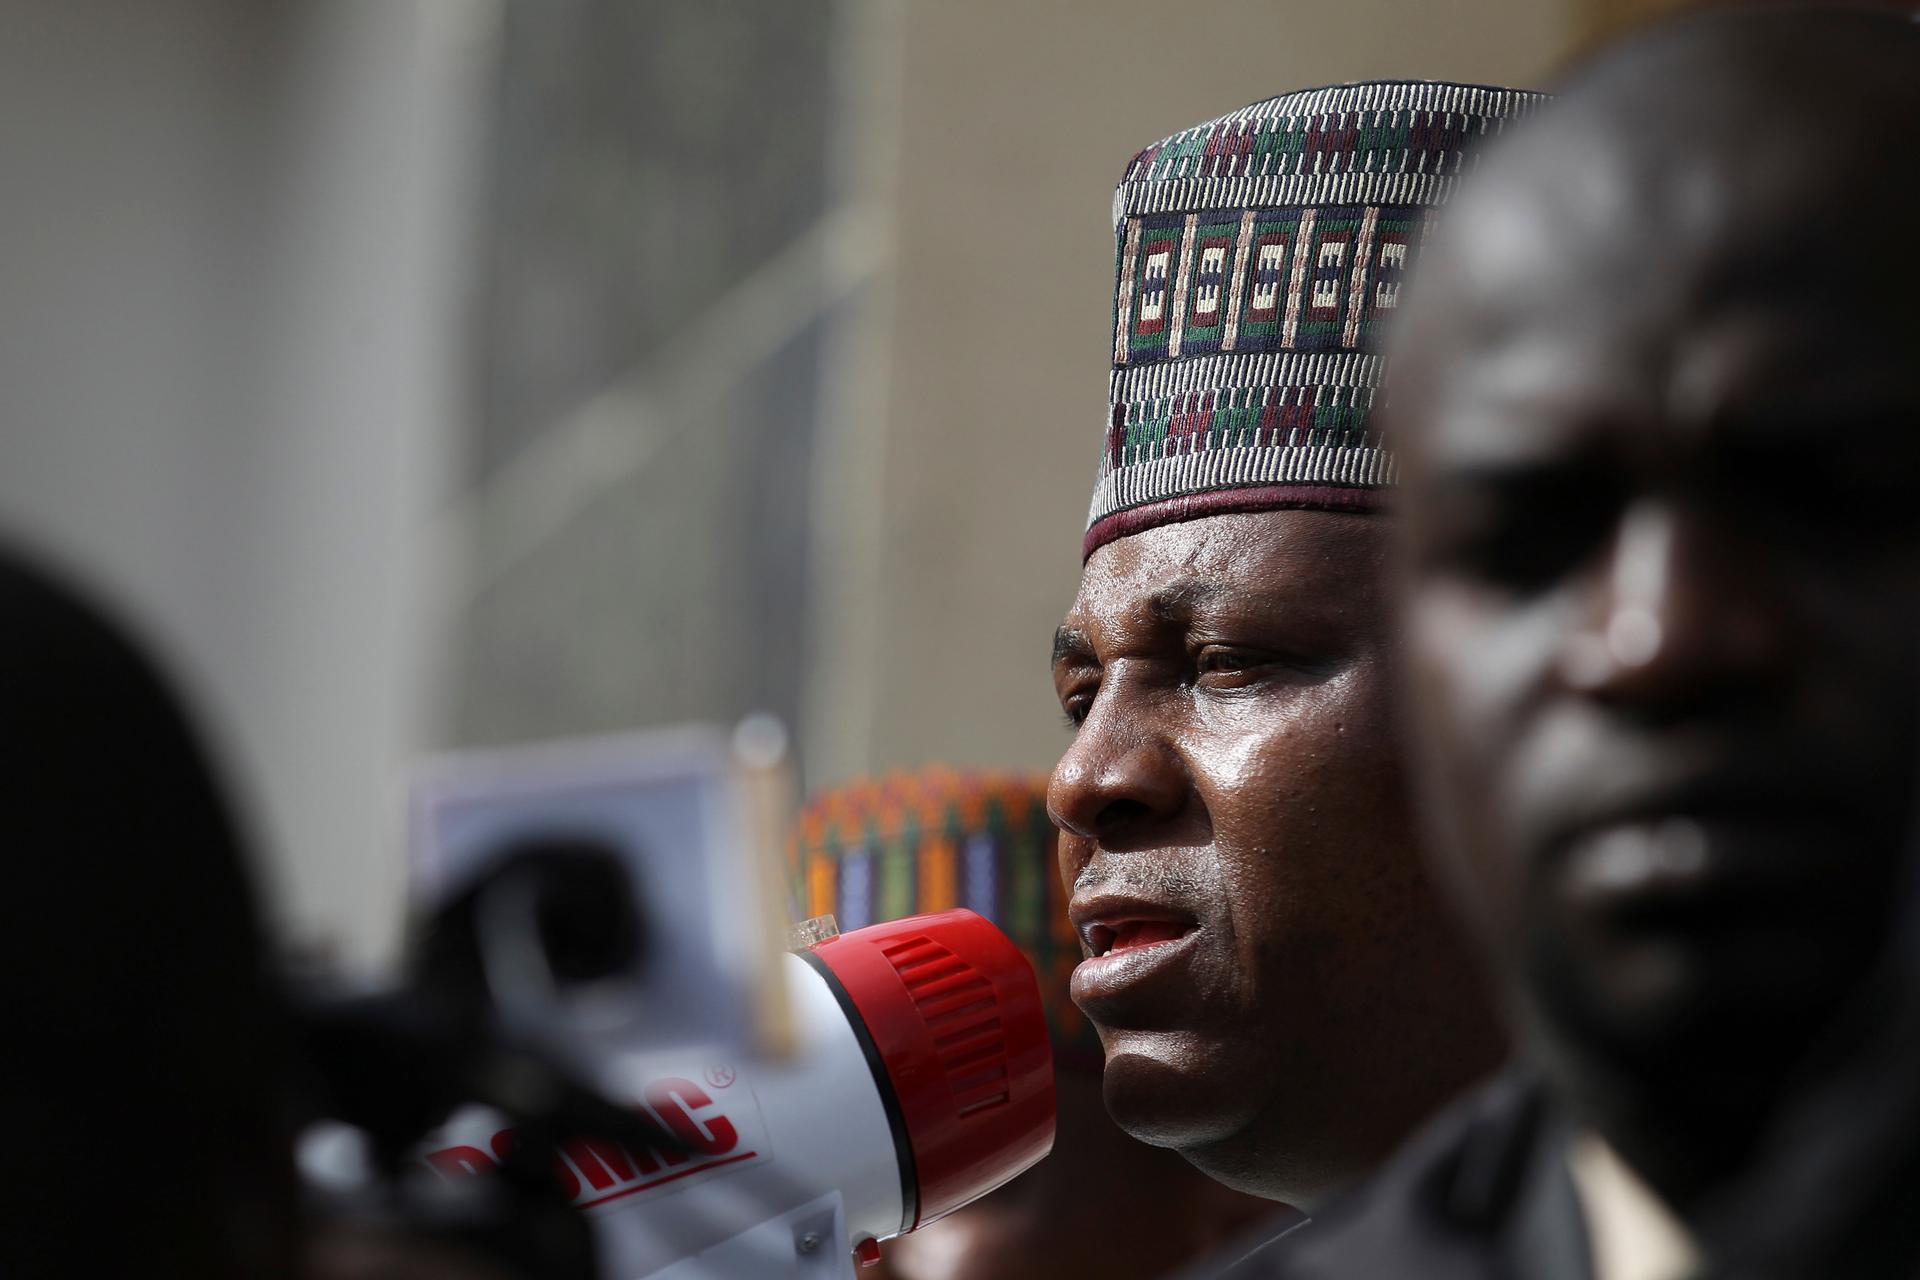 Kashim Shettima, the Governor of Borno state in northeast Nigeria, addresses a protest rally by Nigerians demanding the release of the school girls abducted from the remote village of Chibok. U.S. surveillance aircraft are flying over remote areas of nort